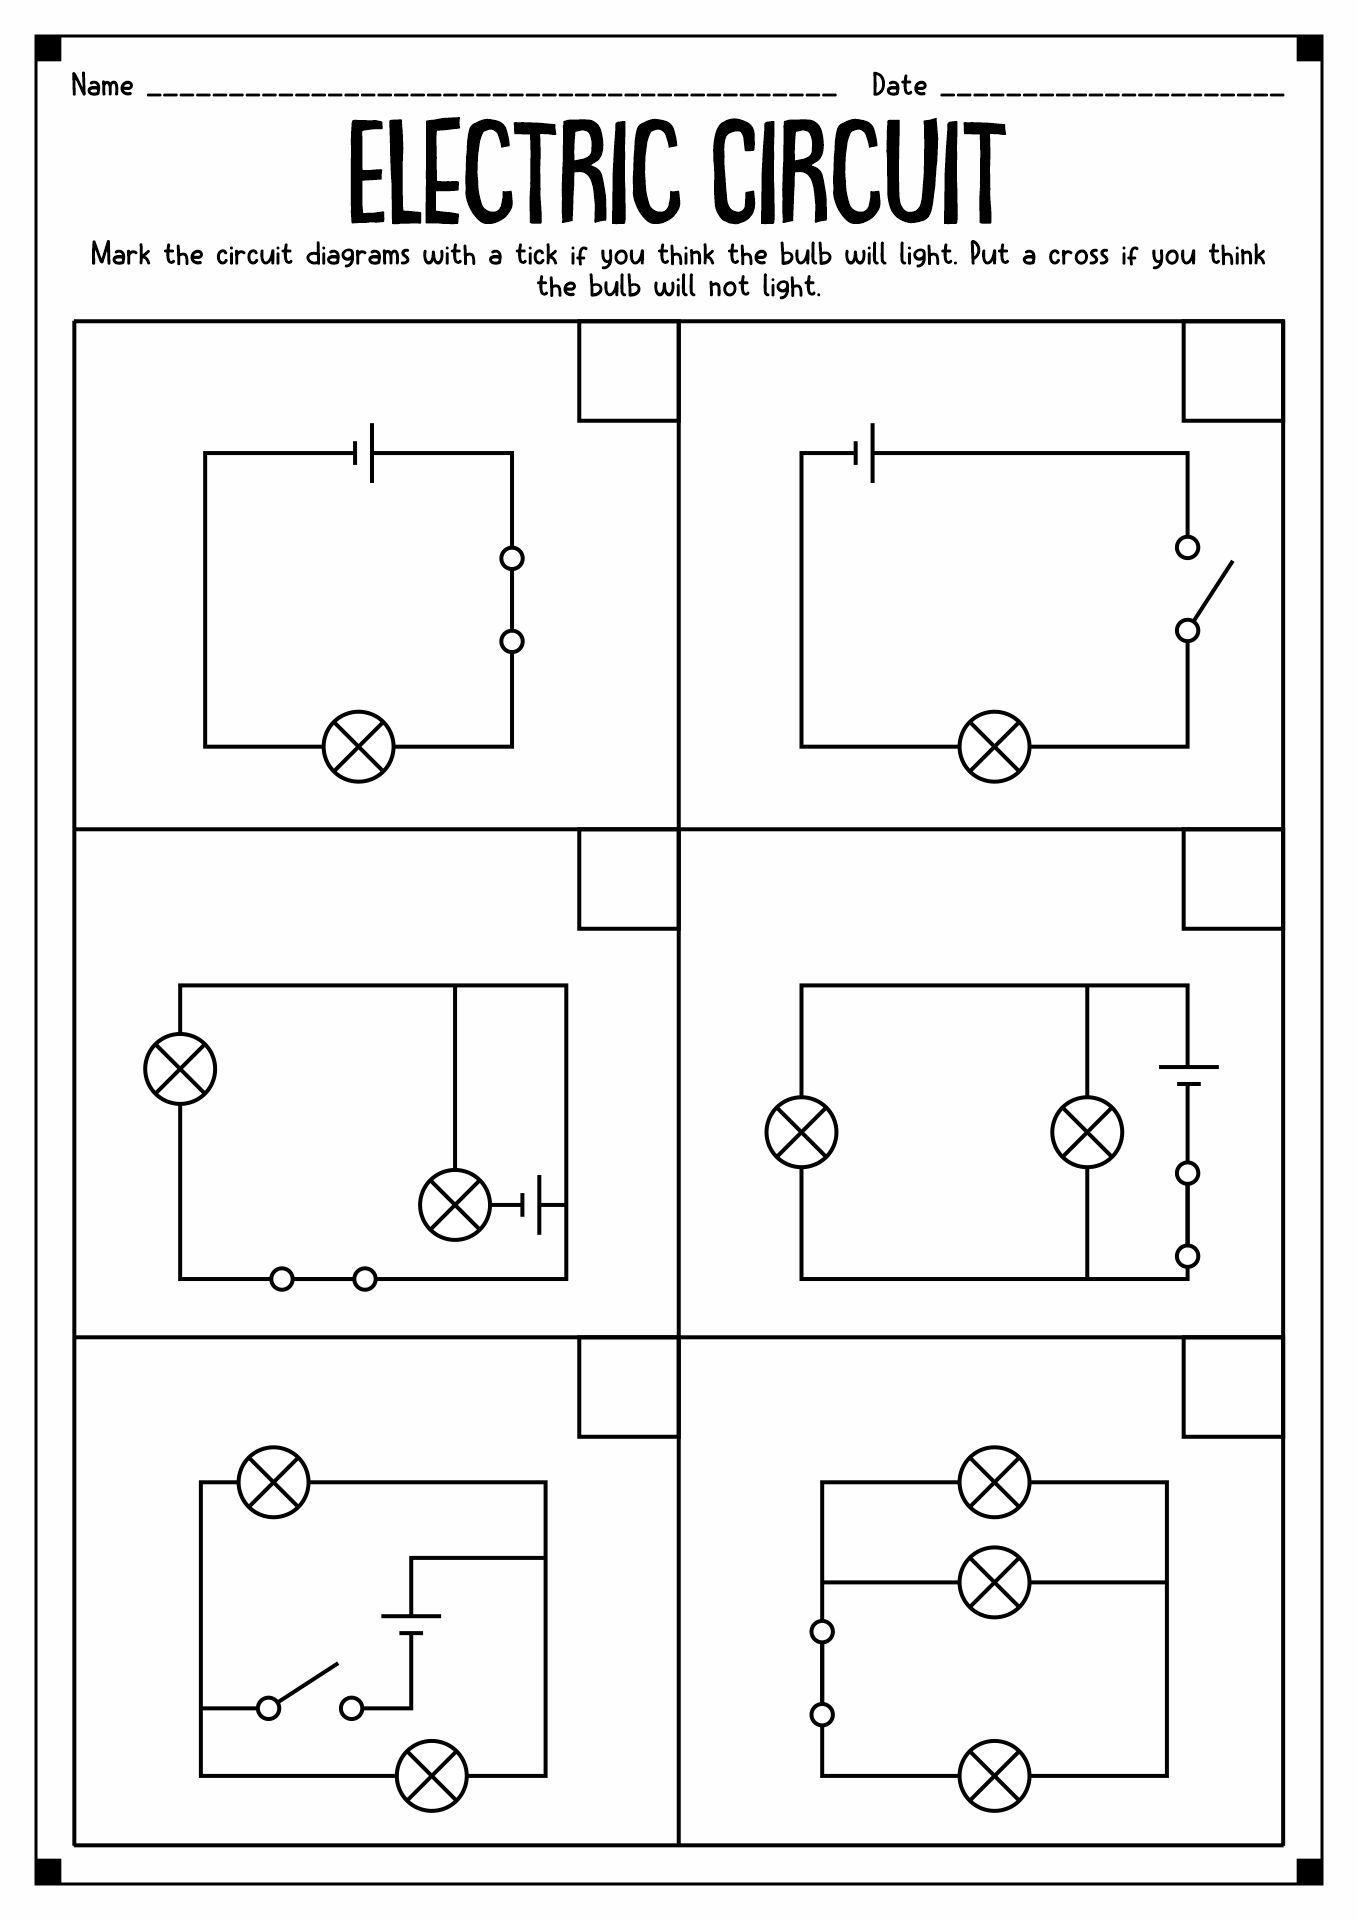 Electricity Circuit Worksheets 4th Grade Image